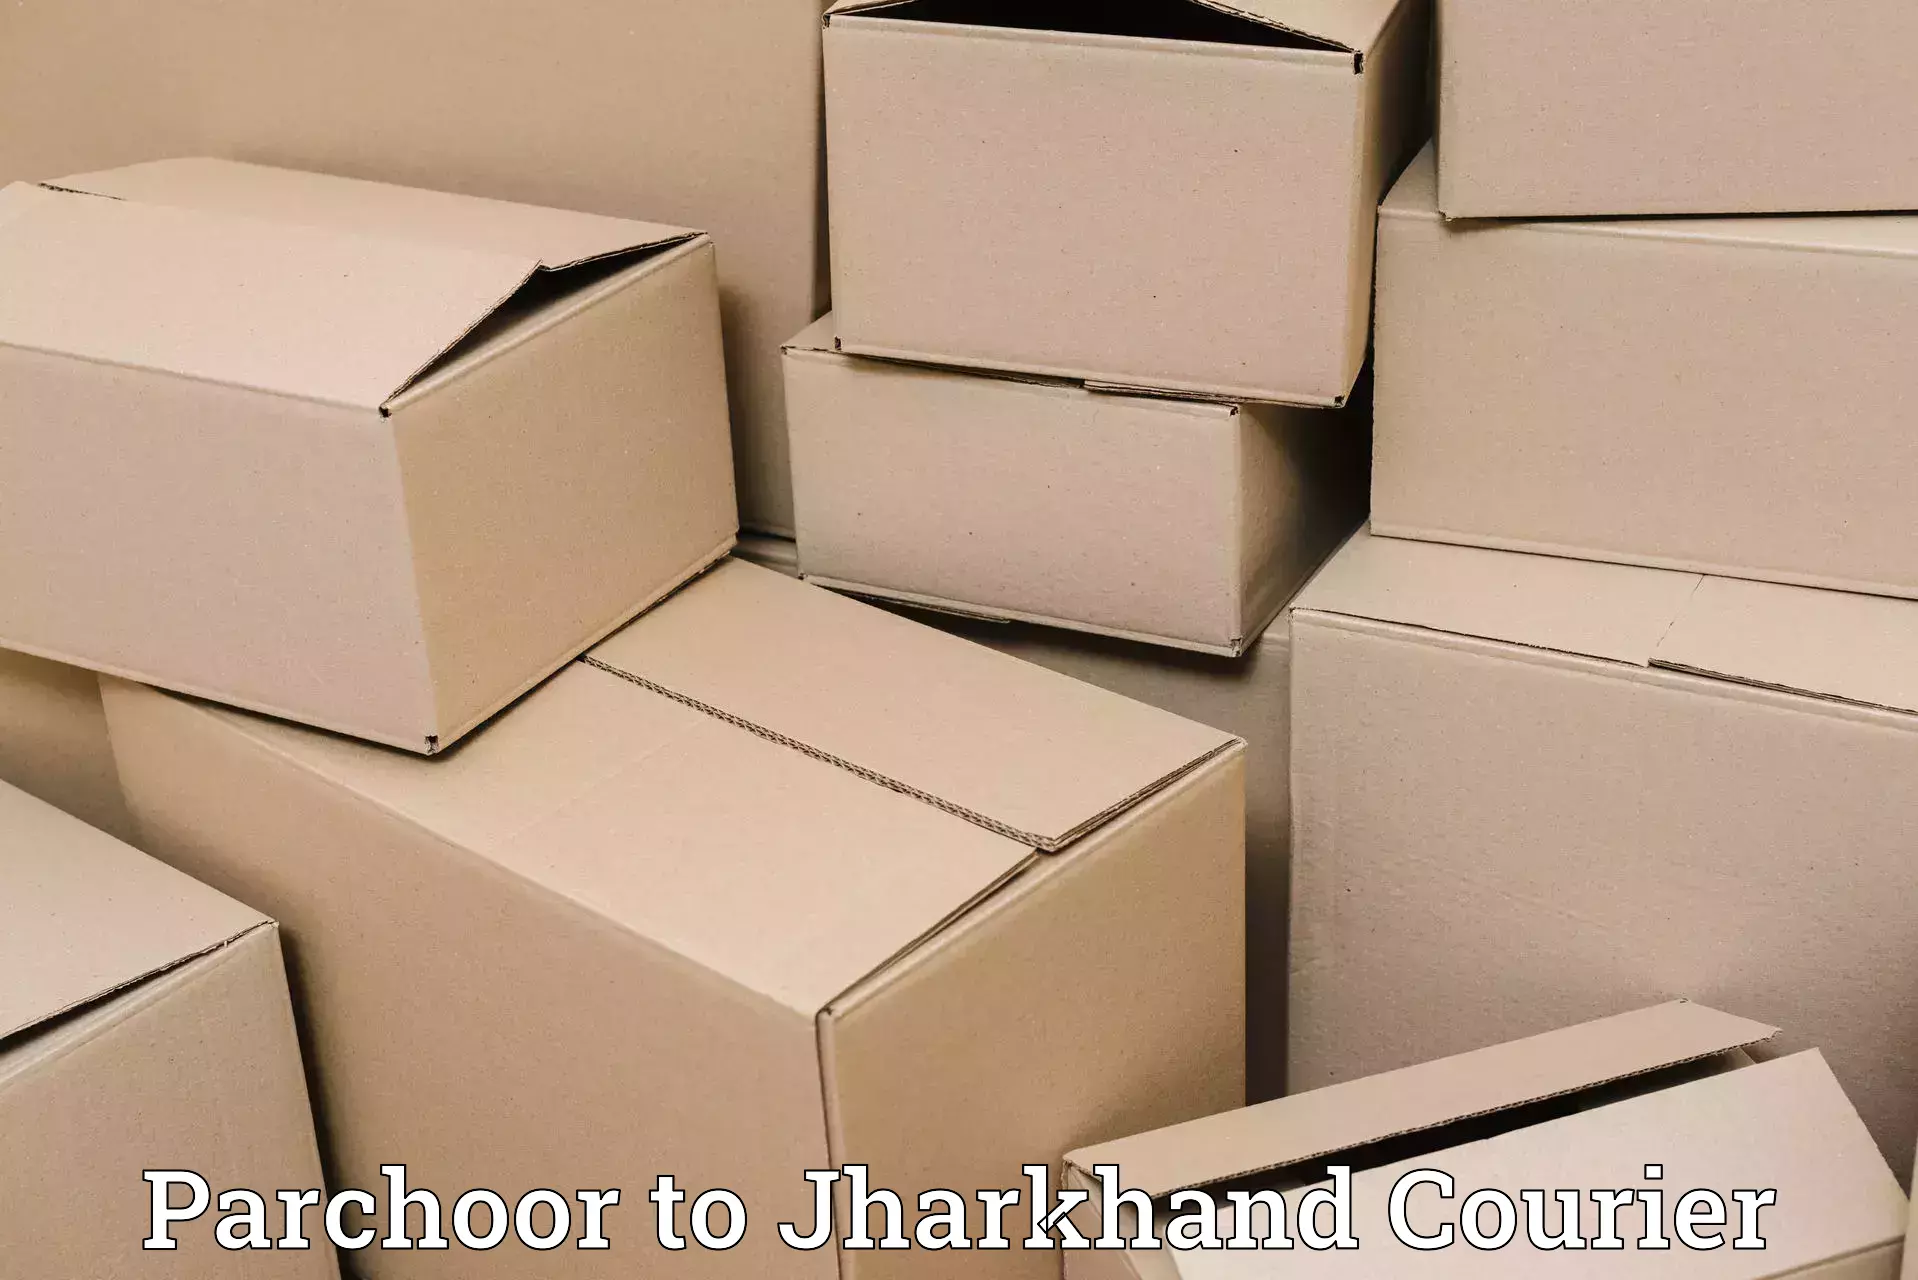 Heavyweight shipping in Parchoor to Hazaribagh